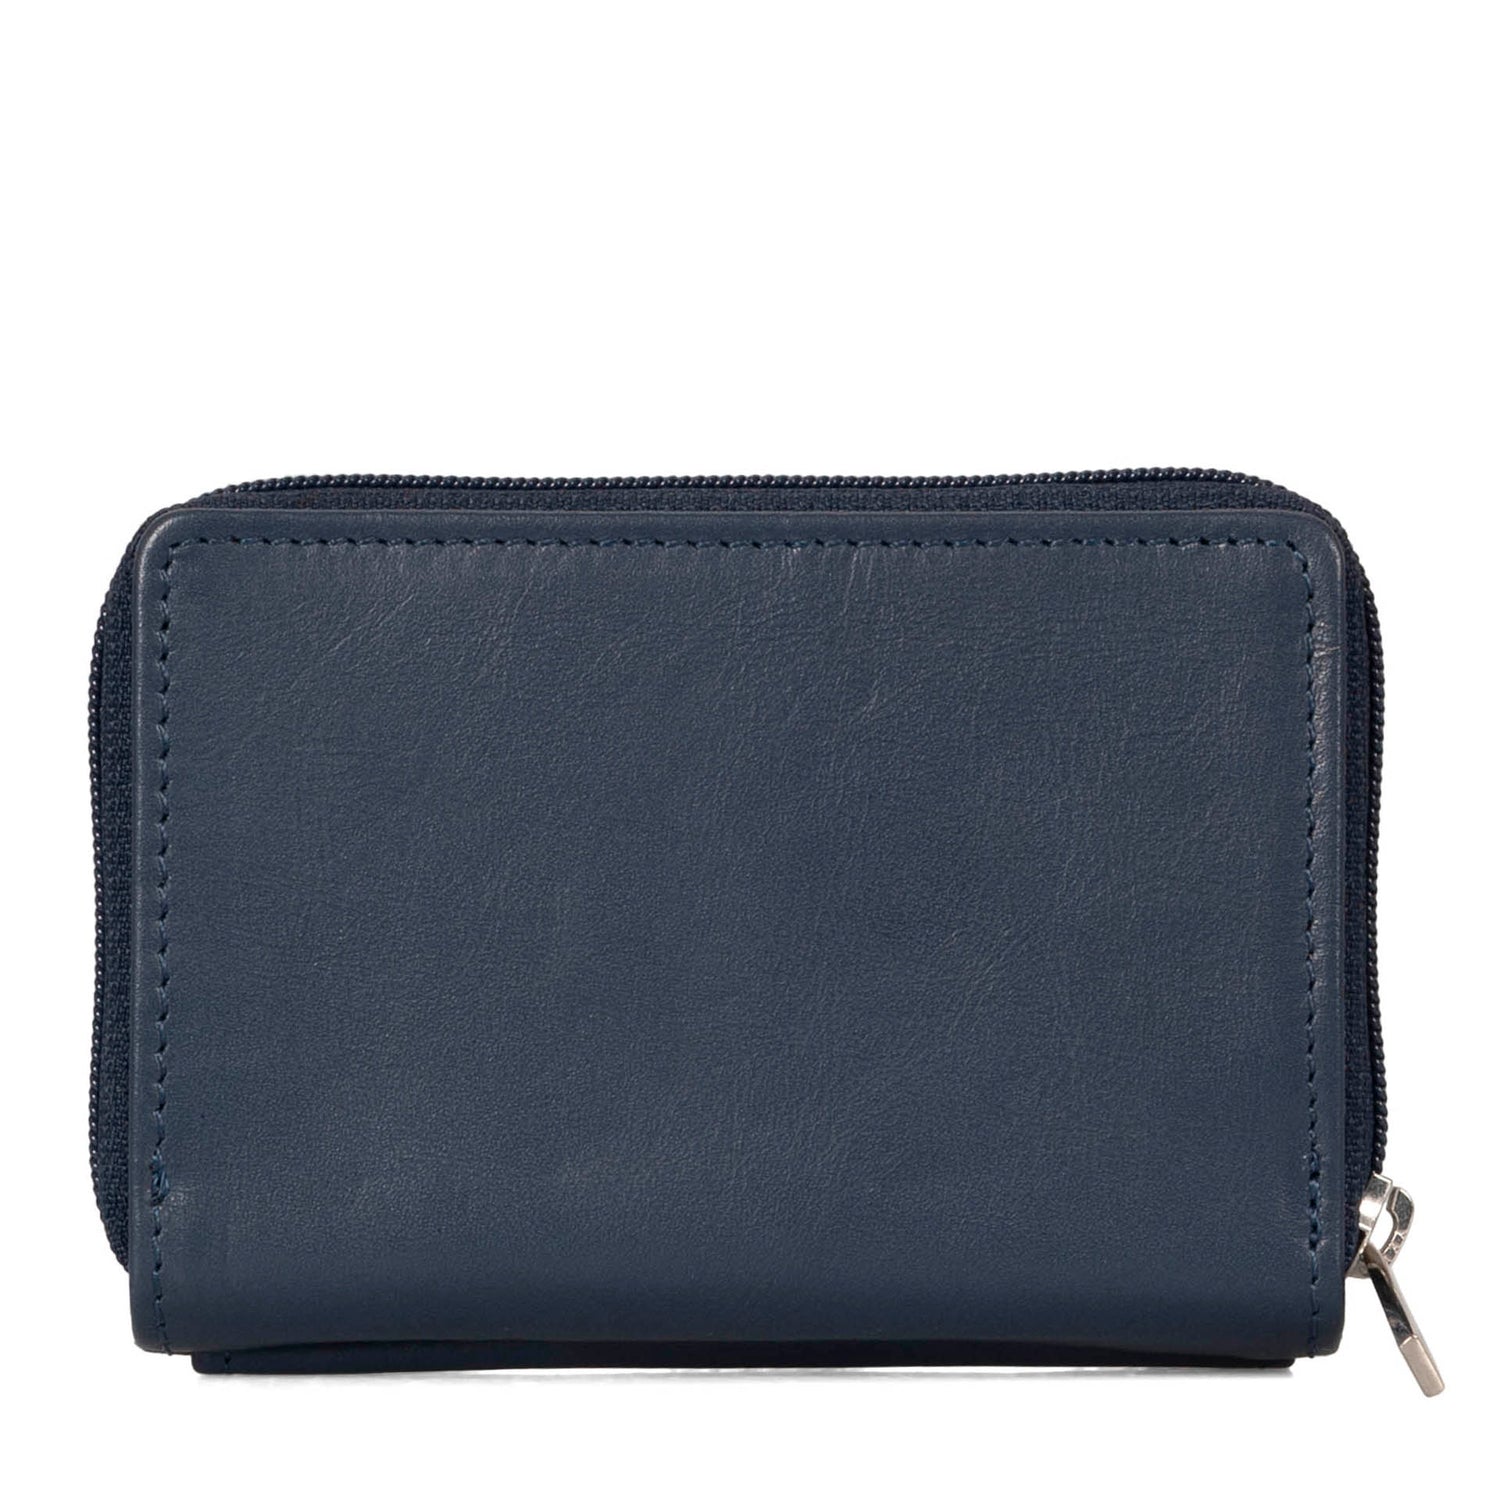 Back side of a blue card holder called basics by tracker, showing its soft leather texture.